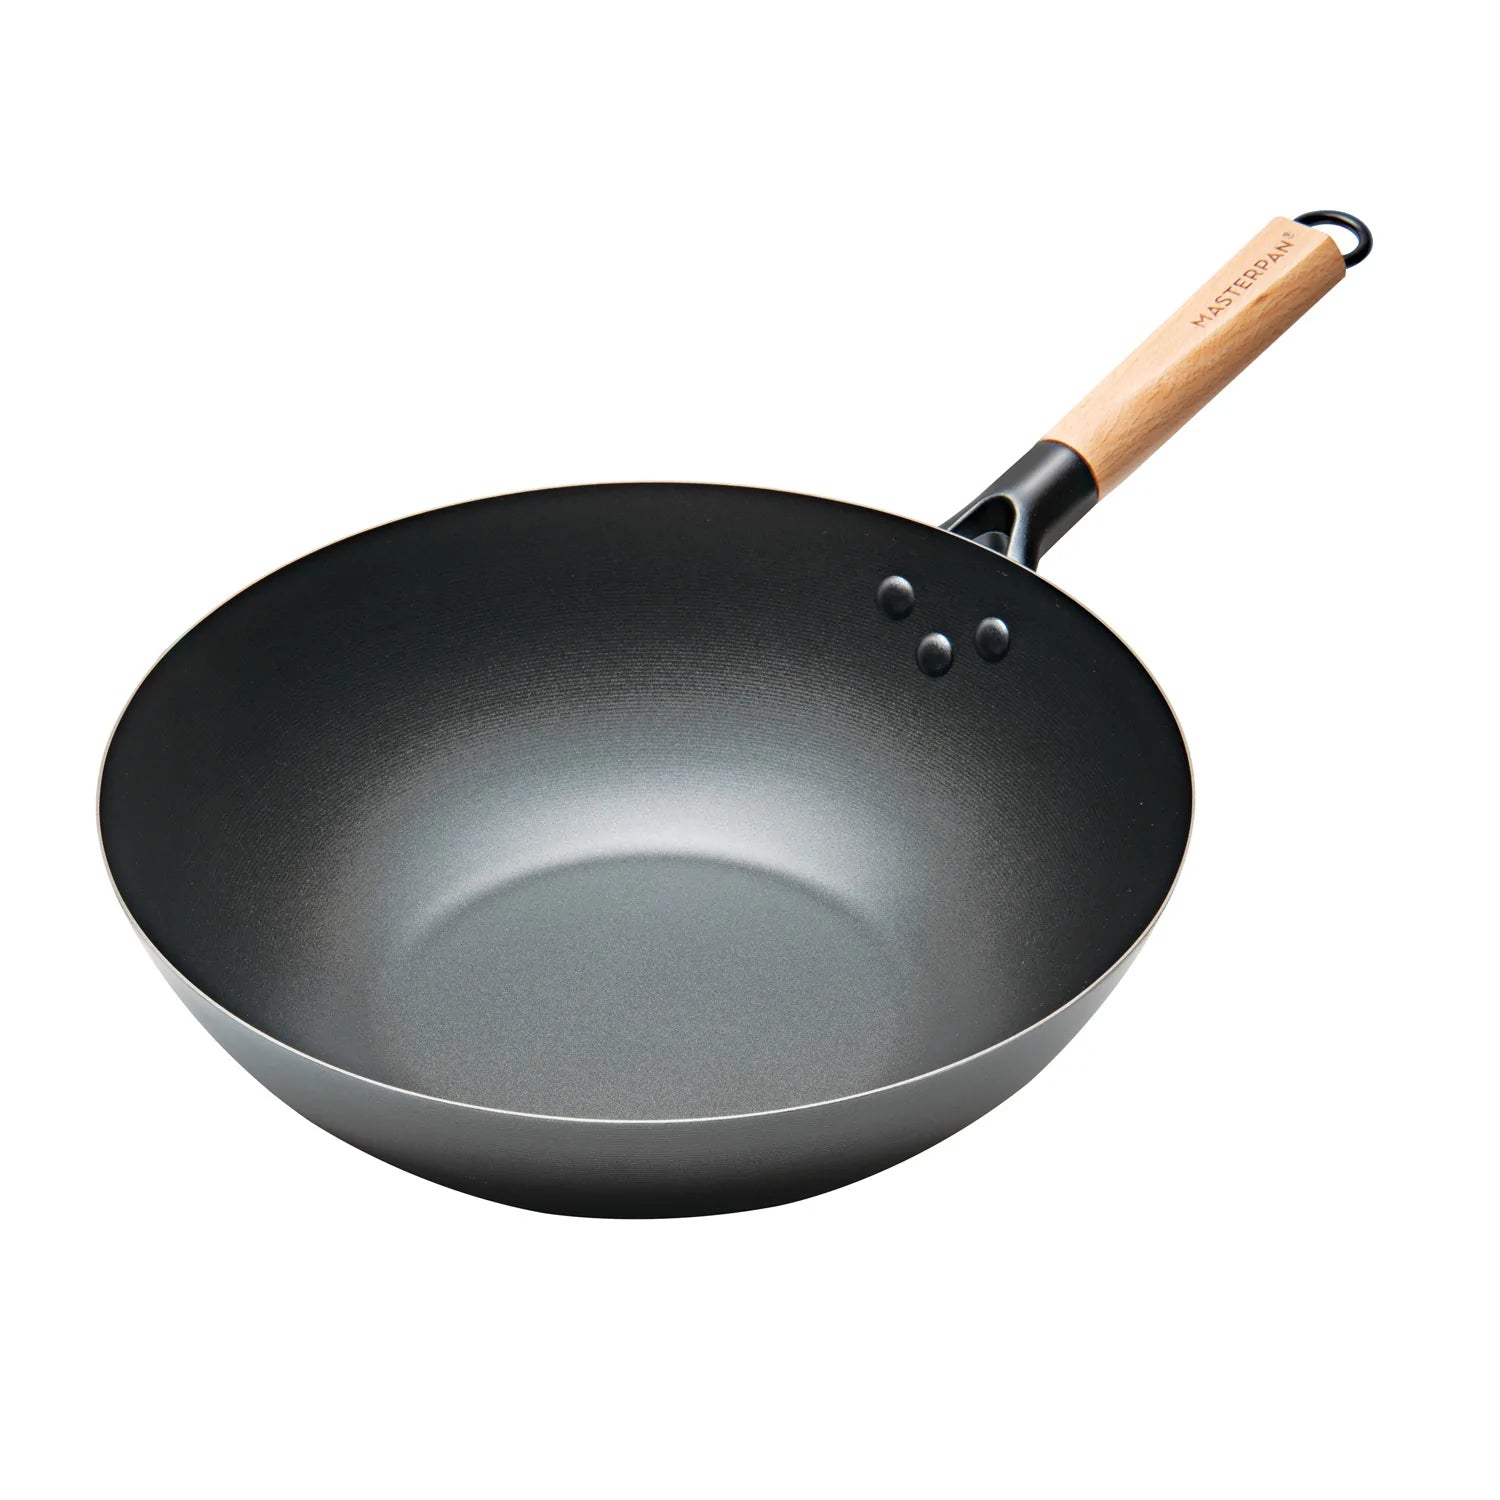 Goodful 12.5 Cast Aluminum, Ceramic Wok Stir-Fry Pan with Side Handle and Long Handle (No Lid) Charcoal